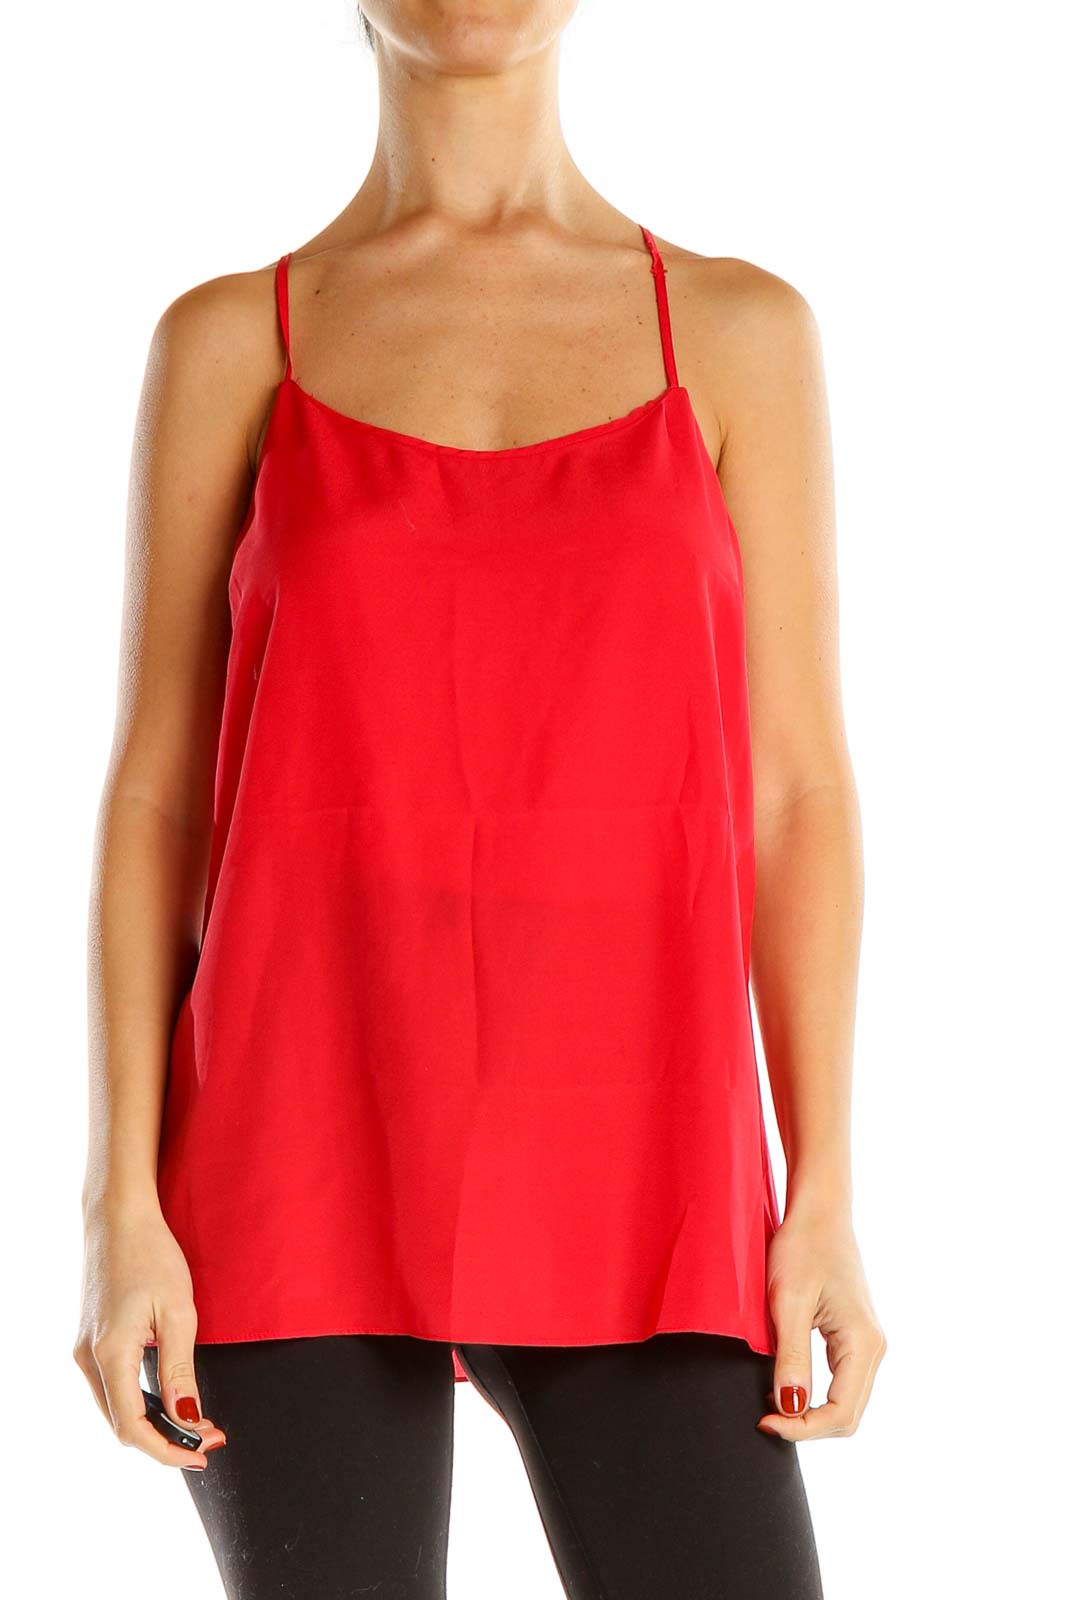 Red Chic Tank Top Front